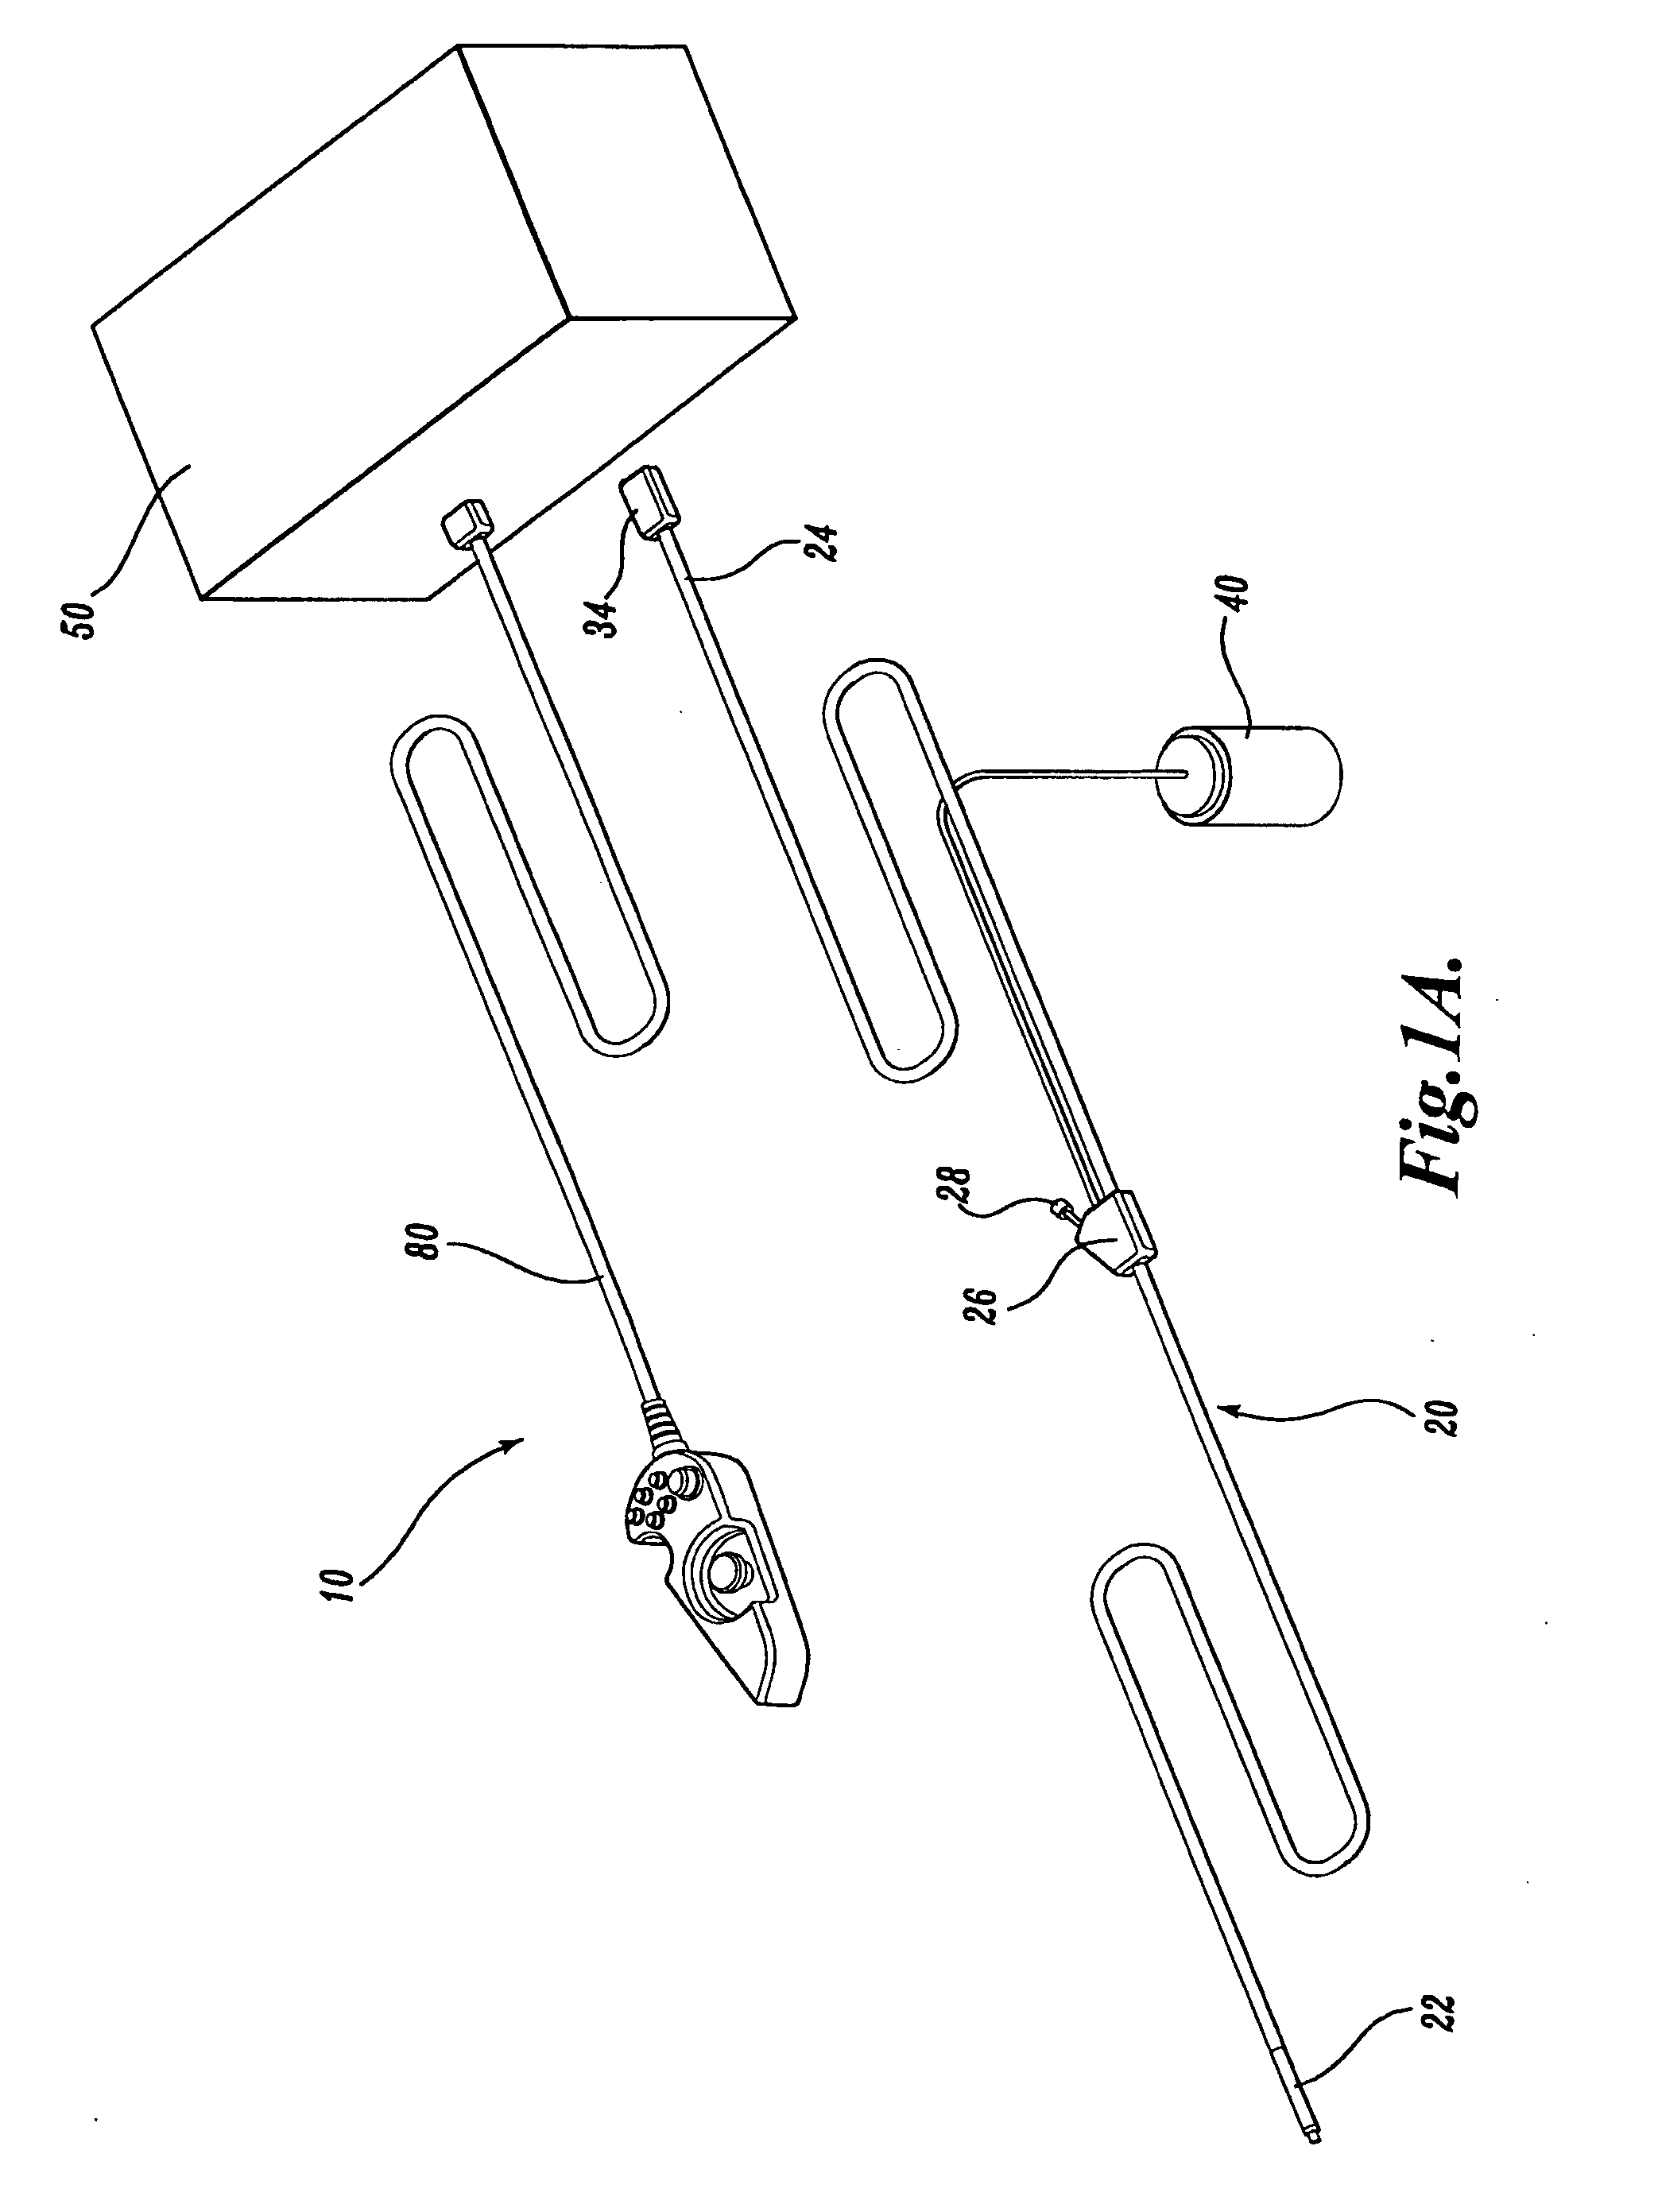 Fluid manifold for endoscope system